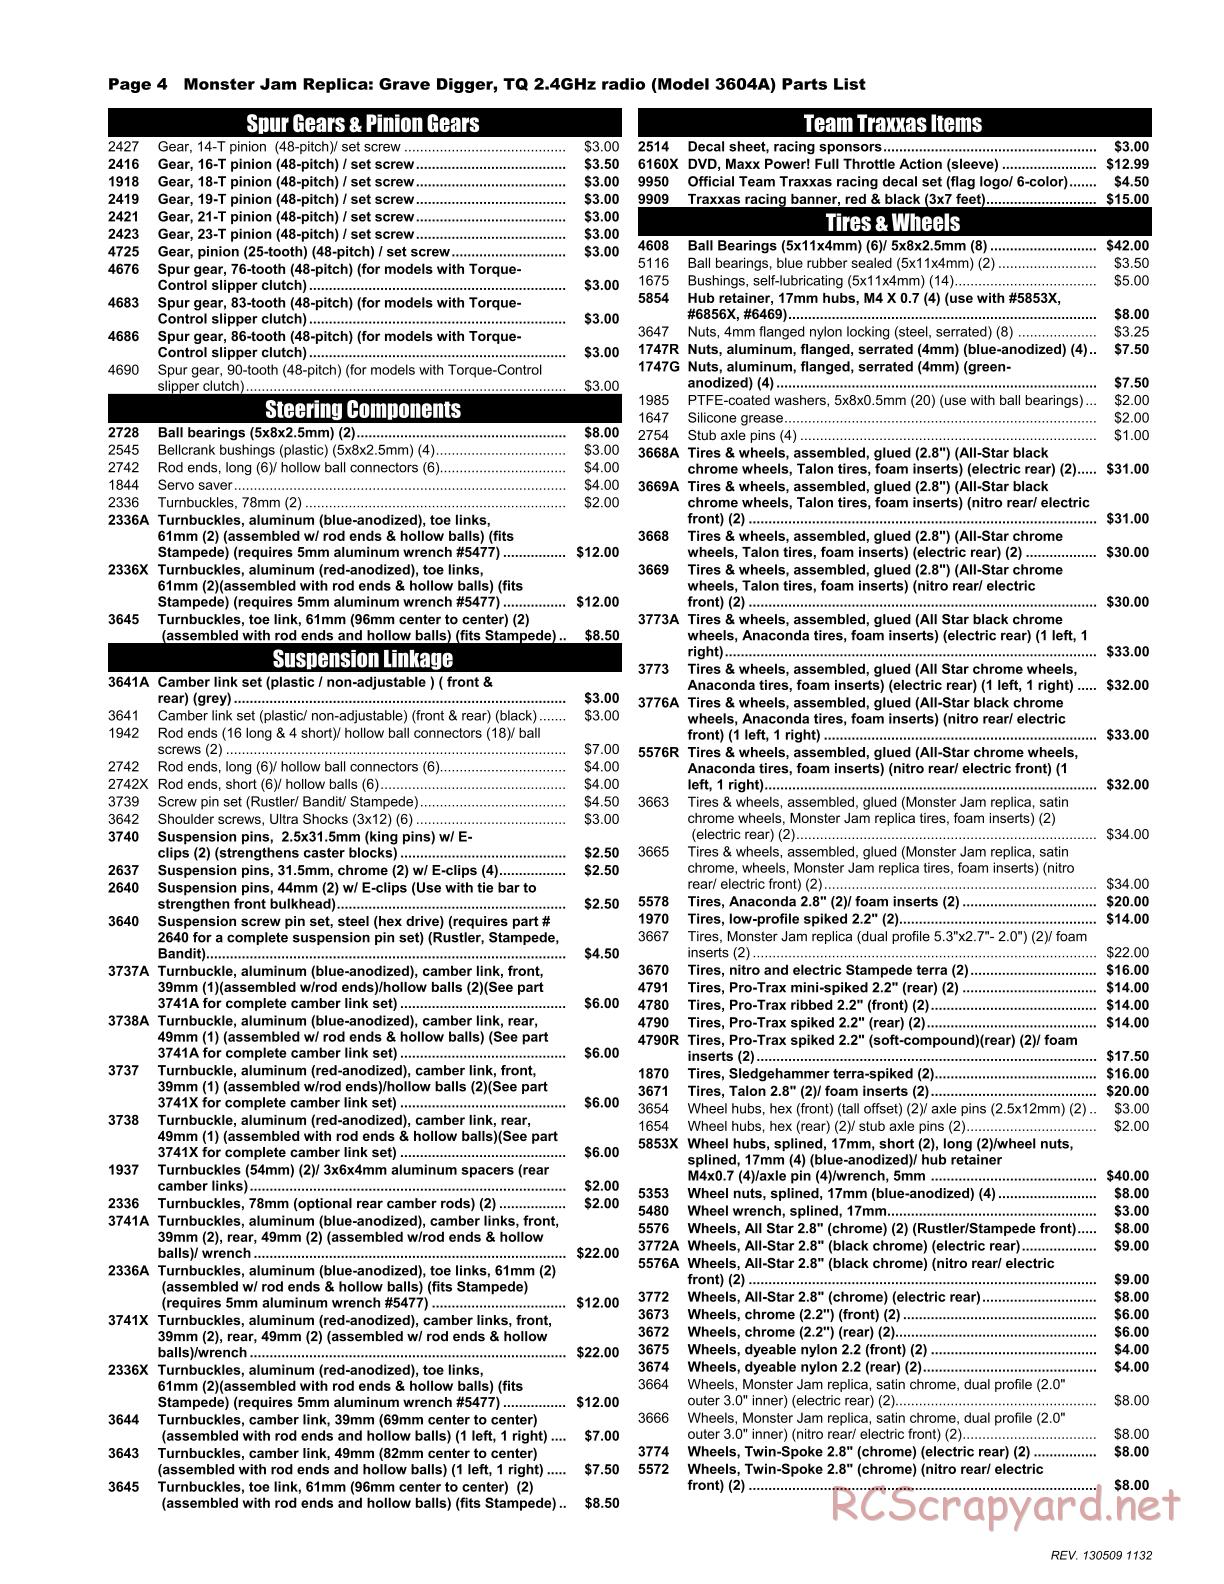 Traxxas - Monster Jam - Grave Digger - Parts List - Page 4